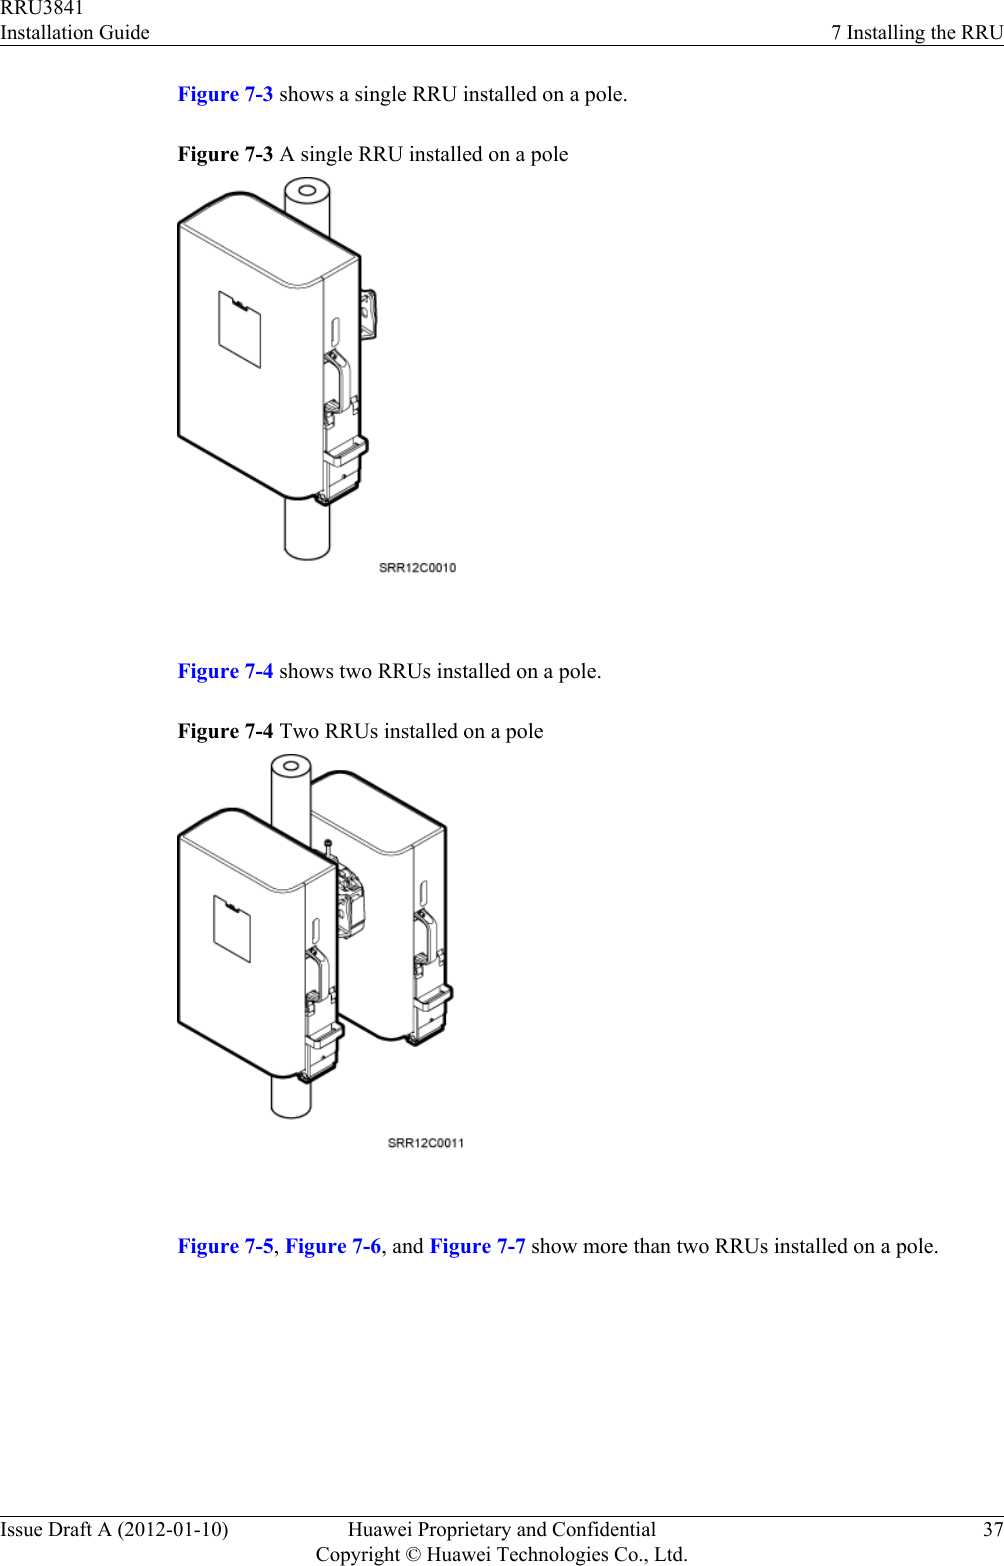 Figure 7-3 shows a single RRU installed on a pole.Figure 7-3 A single RRU installed on a pole Figure 7-4 shows two RRUs installed on a pole.Figure 7-4 Two RRUs installed on a pole Figure 7-5, Figure 7-6, and Figure 7-7 show more than two RRUs installed on a pole.RRU3841Installation Guide 7 Installing the RRUIssue Draft A (2012-01-10) Huawei Proprietary and ConfidentialCopyright © Huawei Technologies Co., Ltd.37